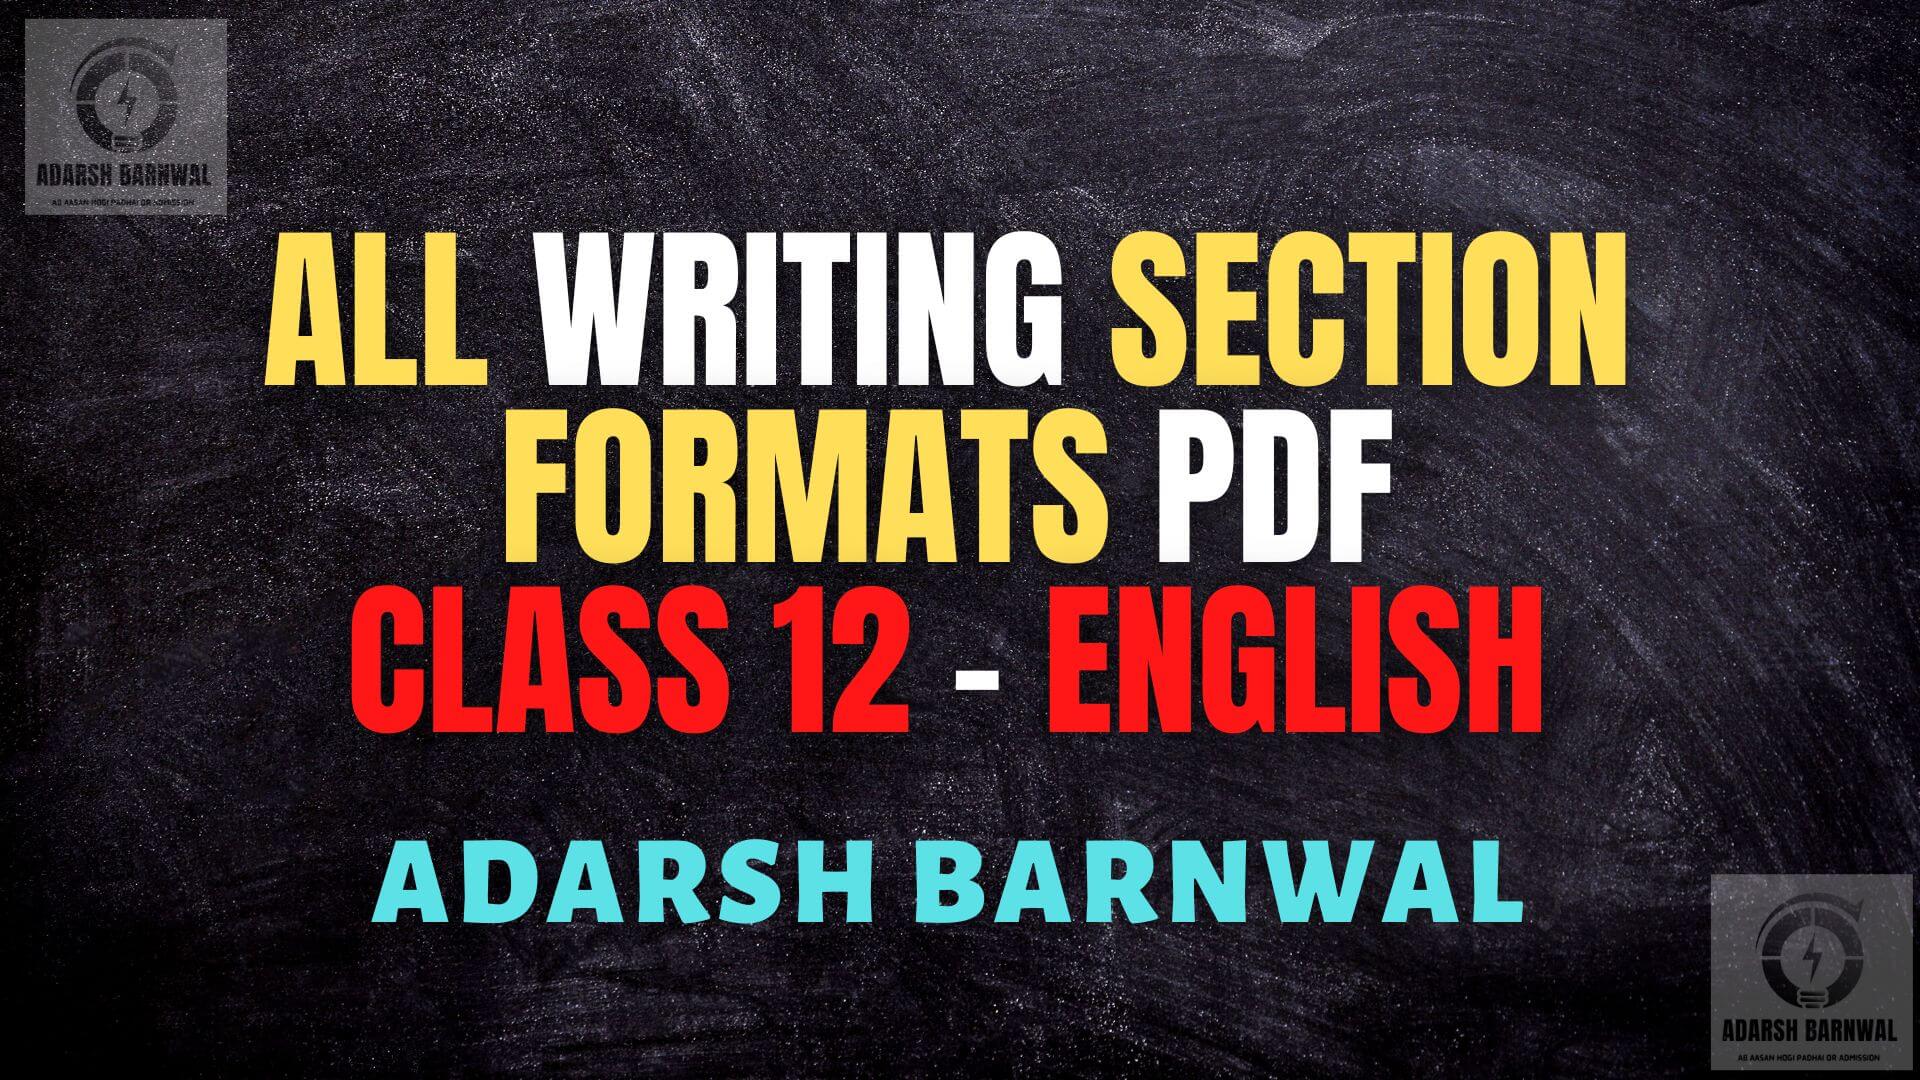 Cbse class 12 English Writing section formats pdf by Adarsh Barnwal